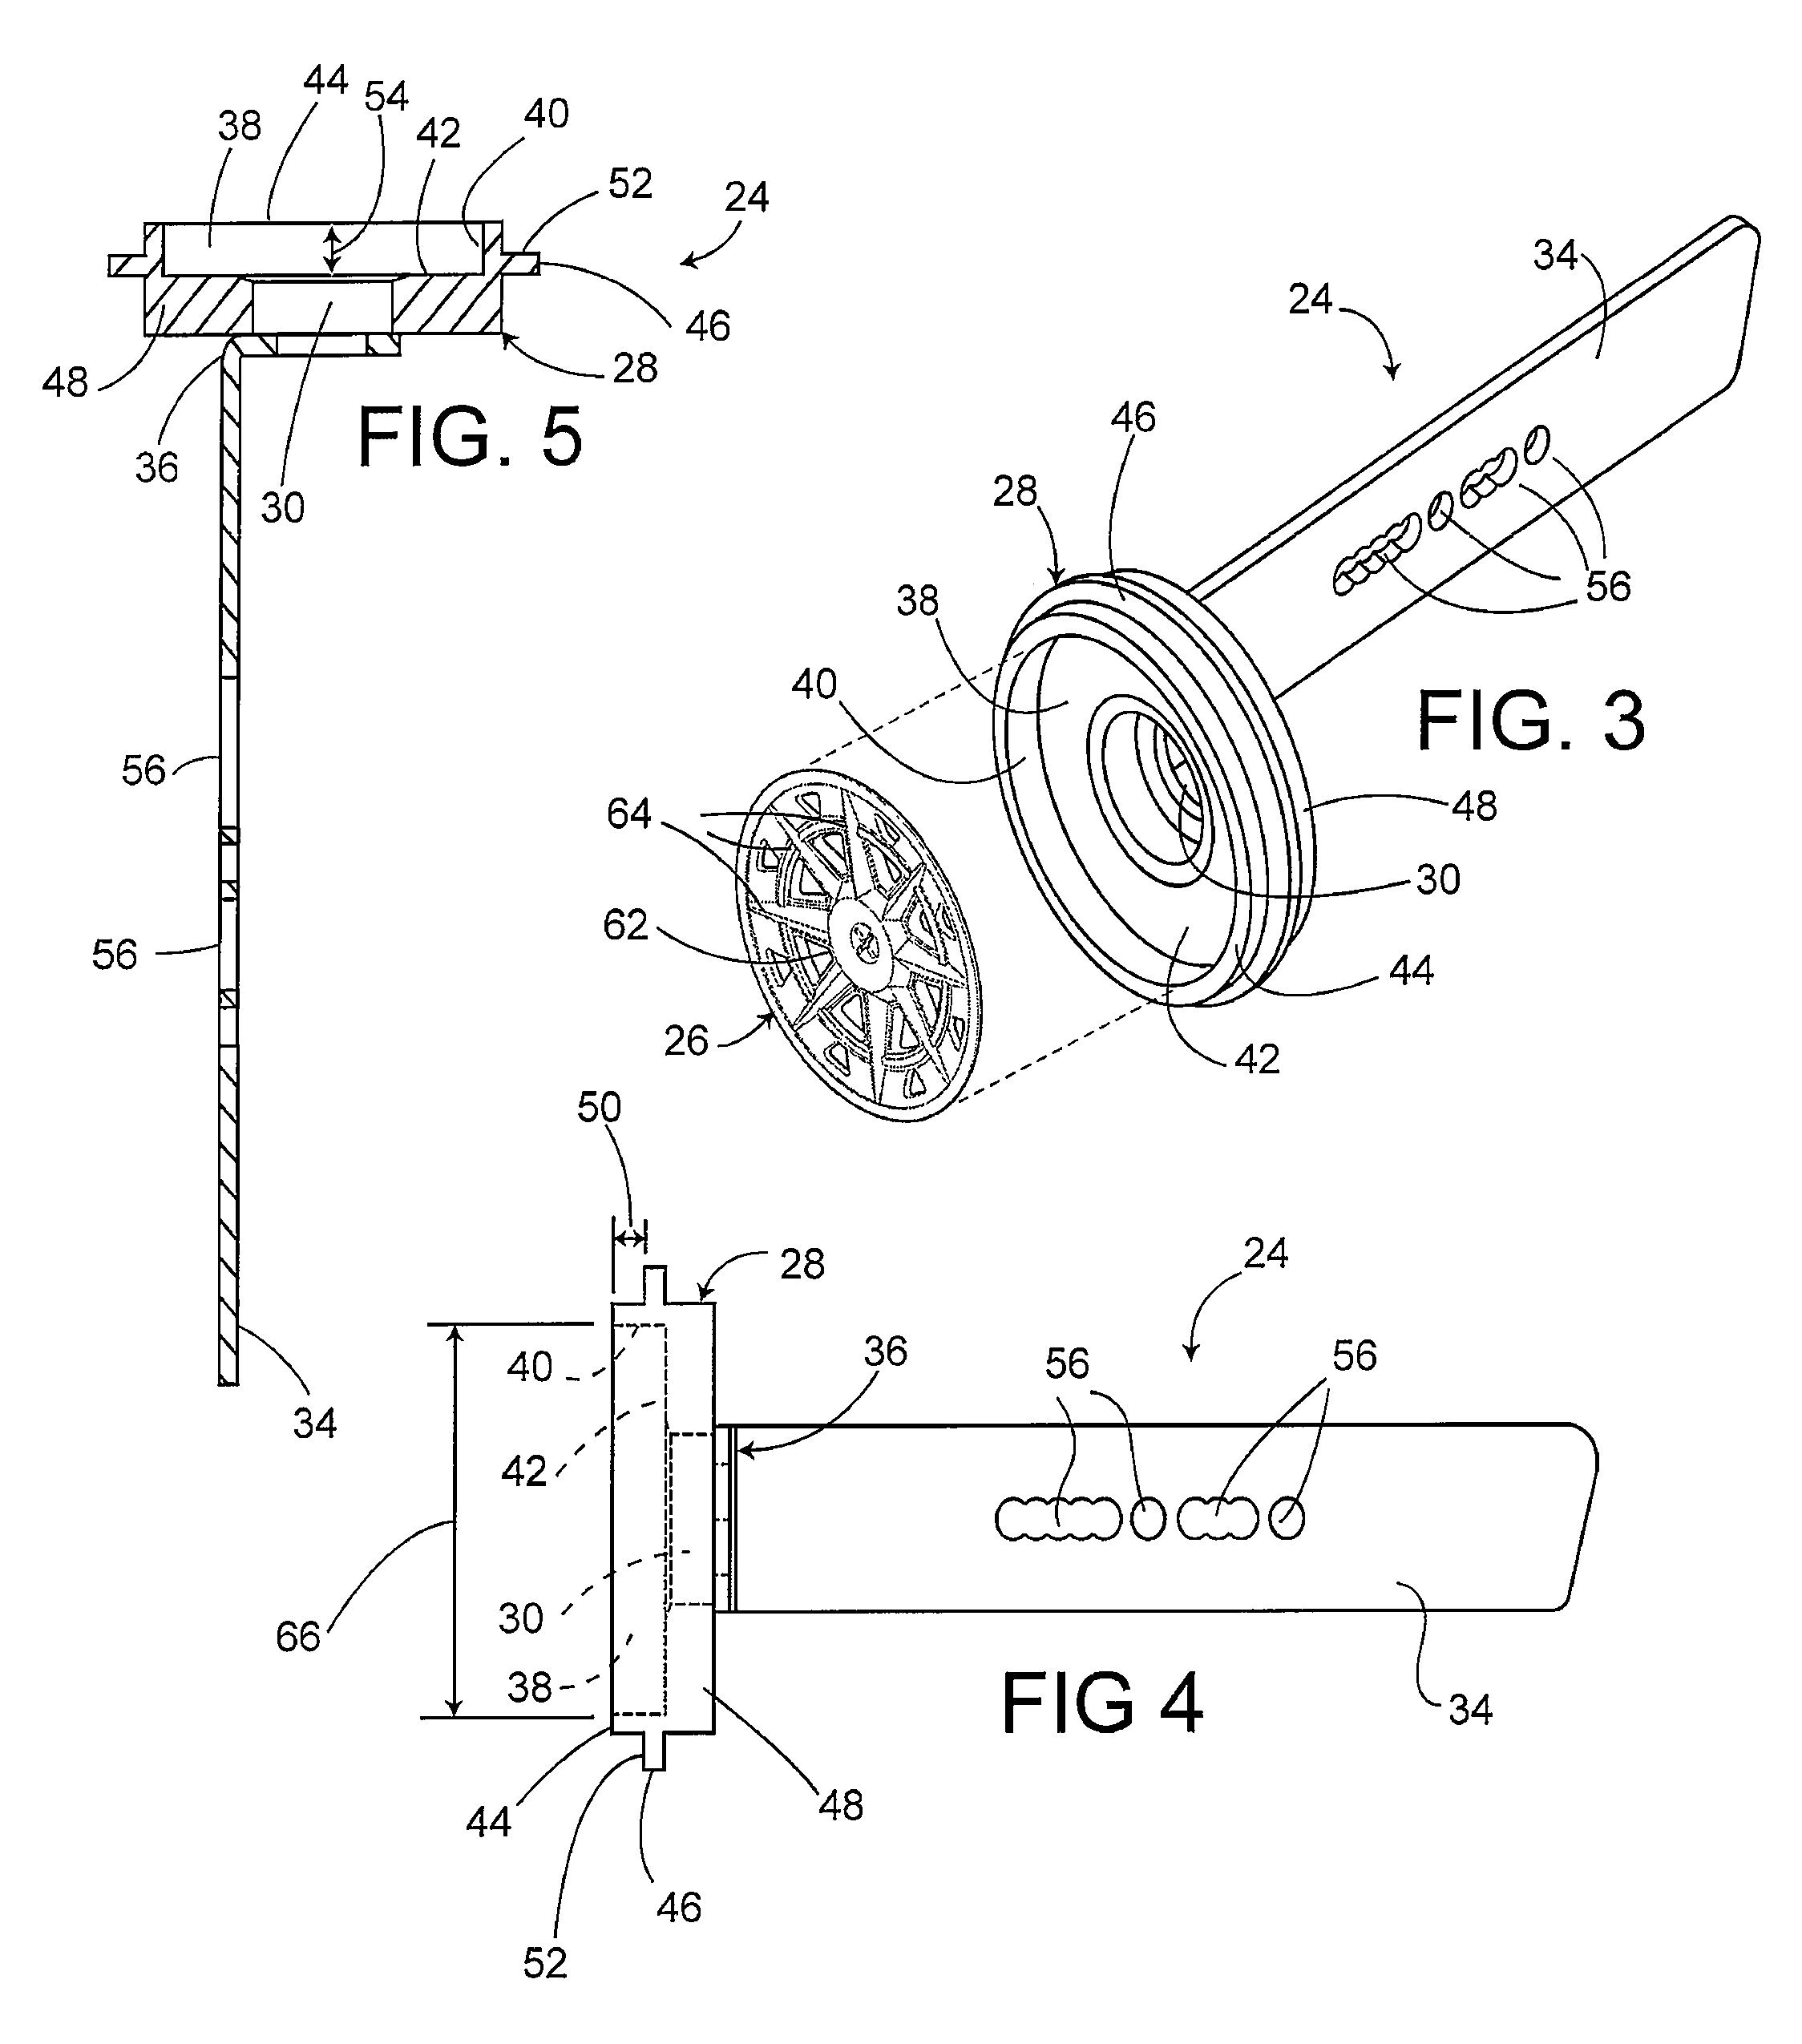 Fastener gun washer assembly holding device and method of use